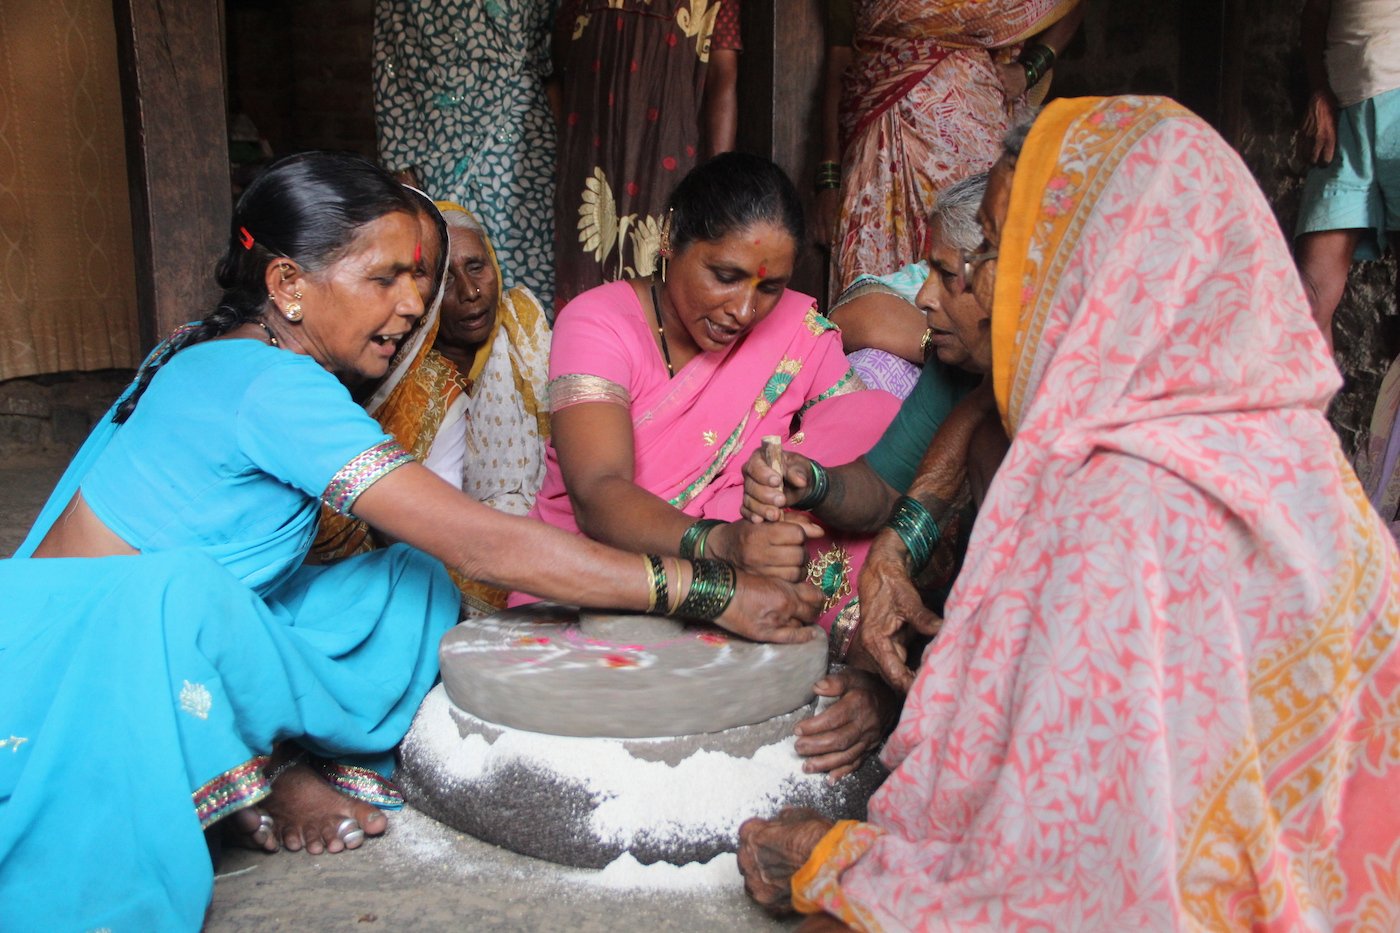 Women sitting by the grinding stone